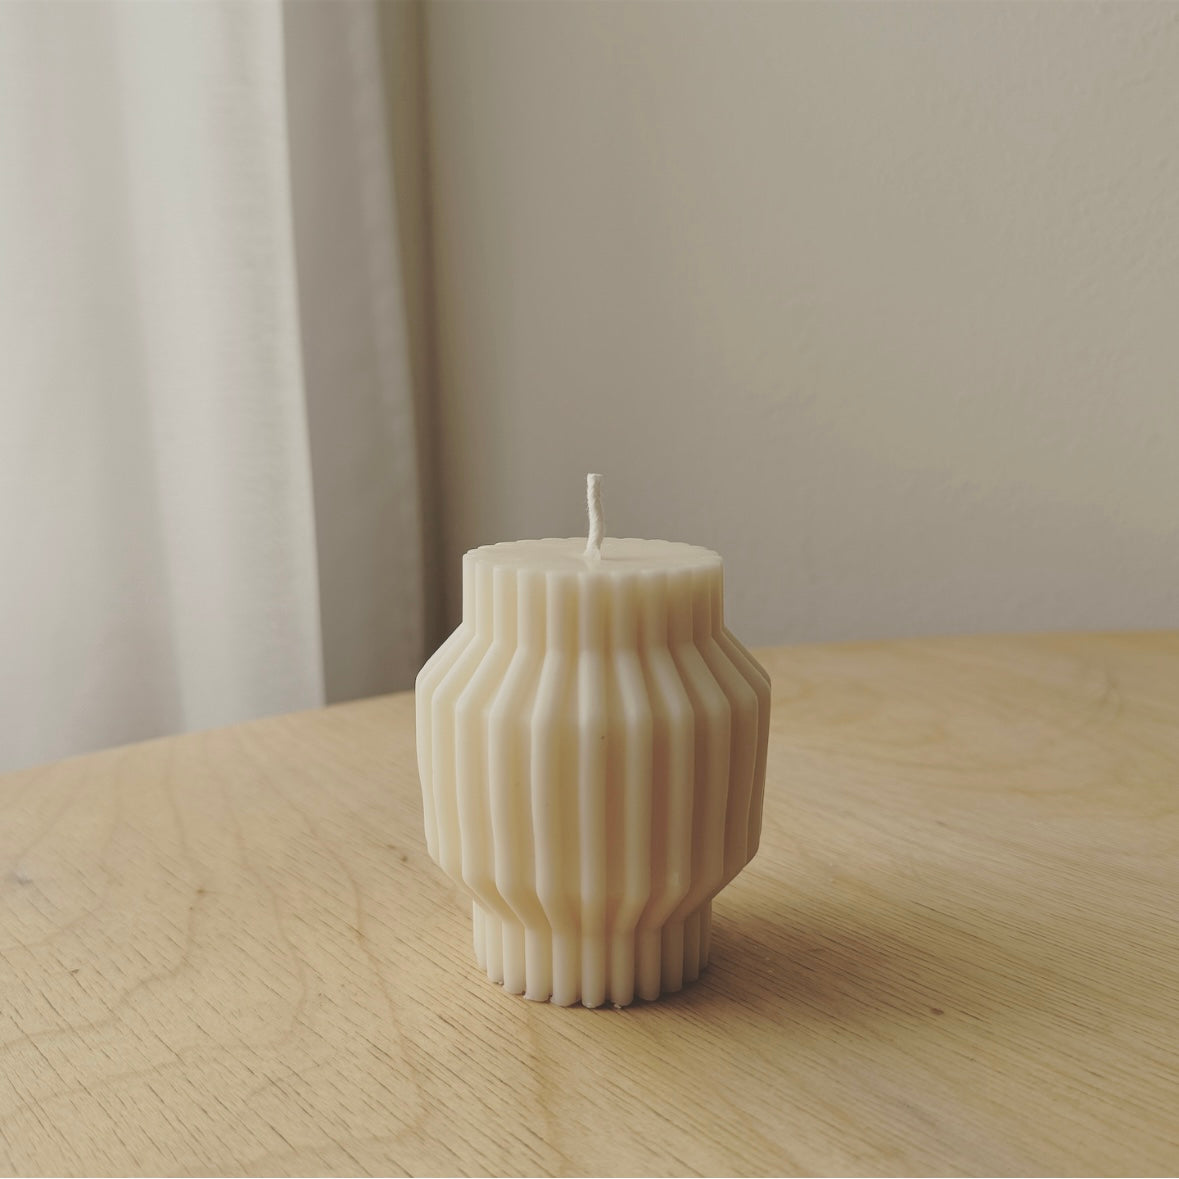 Candle - The Thasa